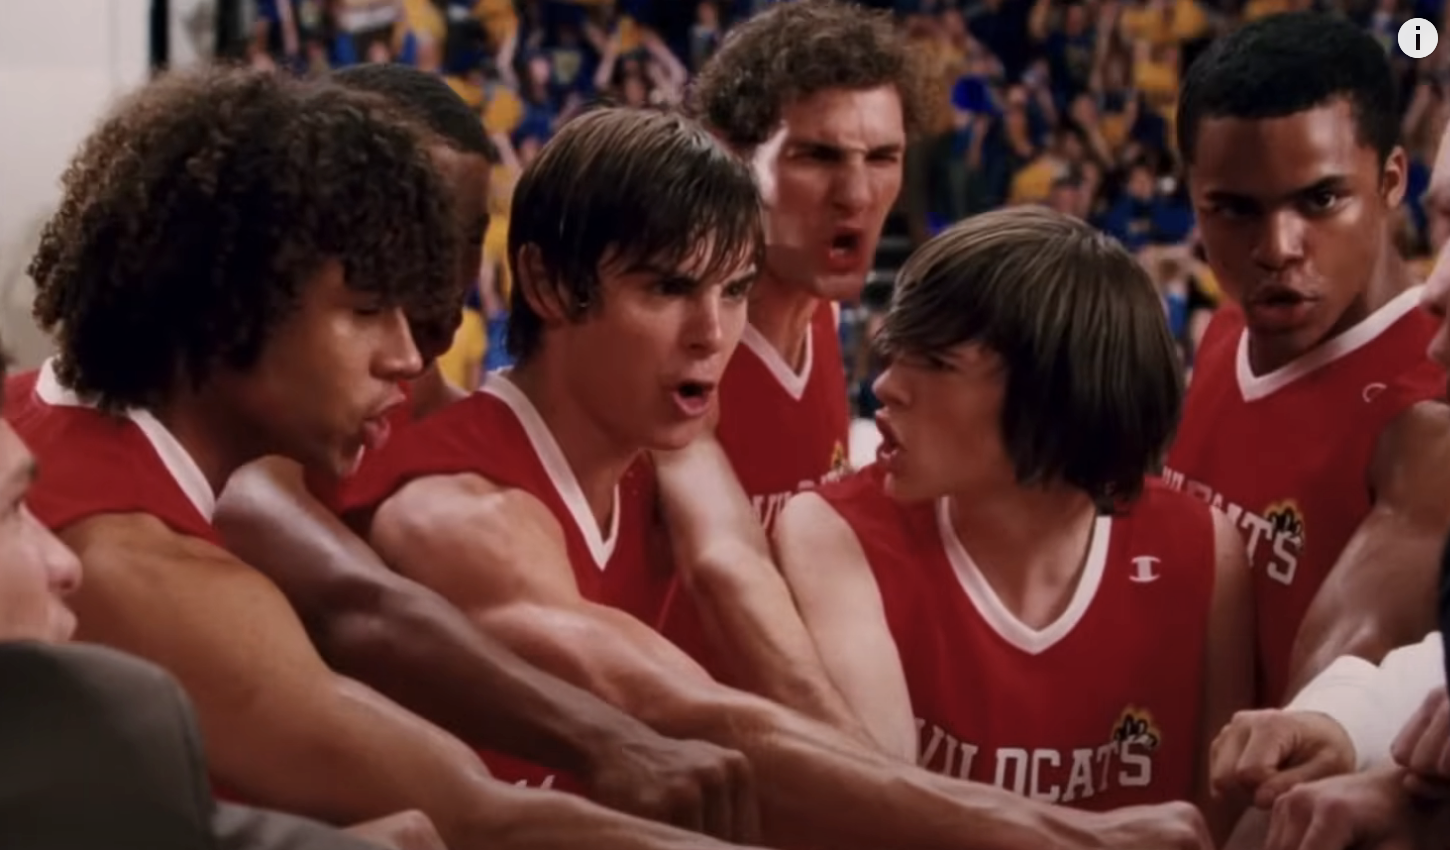 Troy, Chad, and other Wildcats in a huddle on the basketball court, looking focused